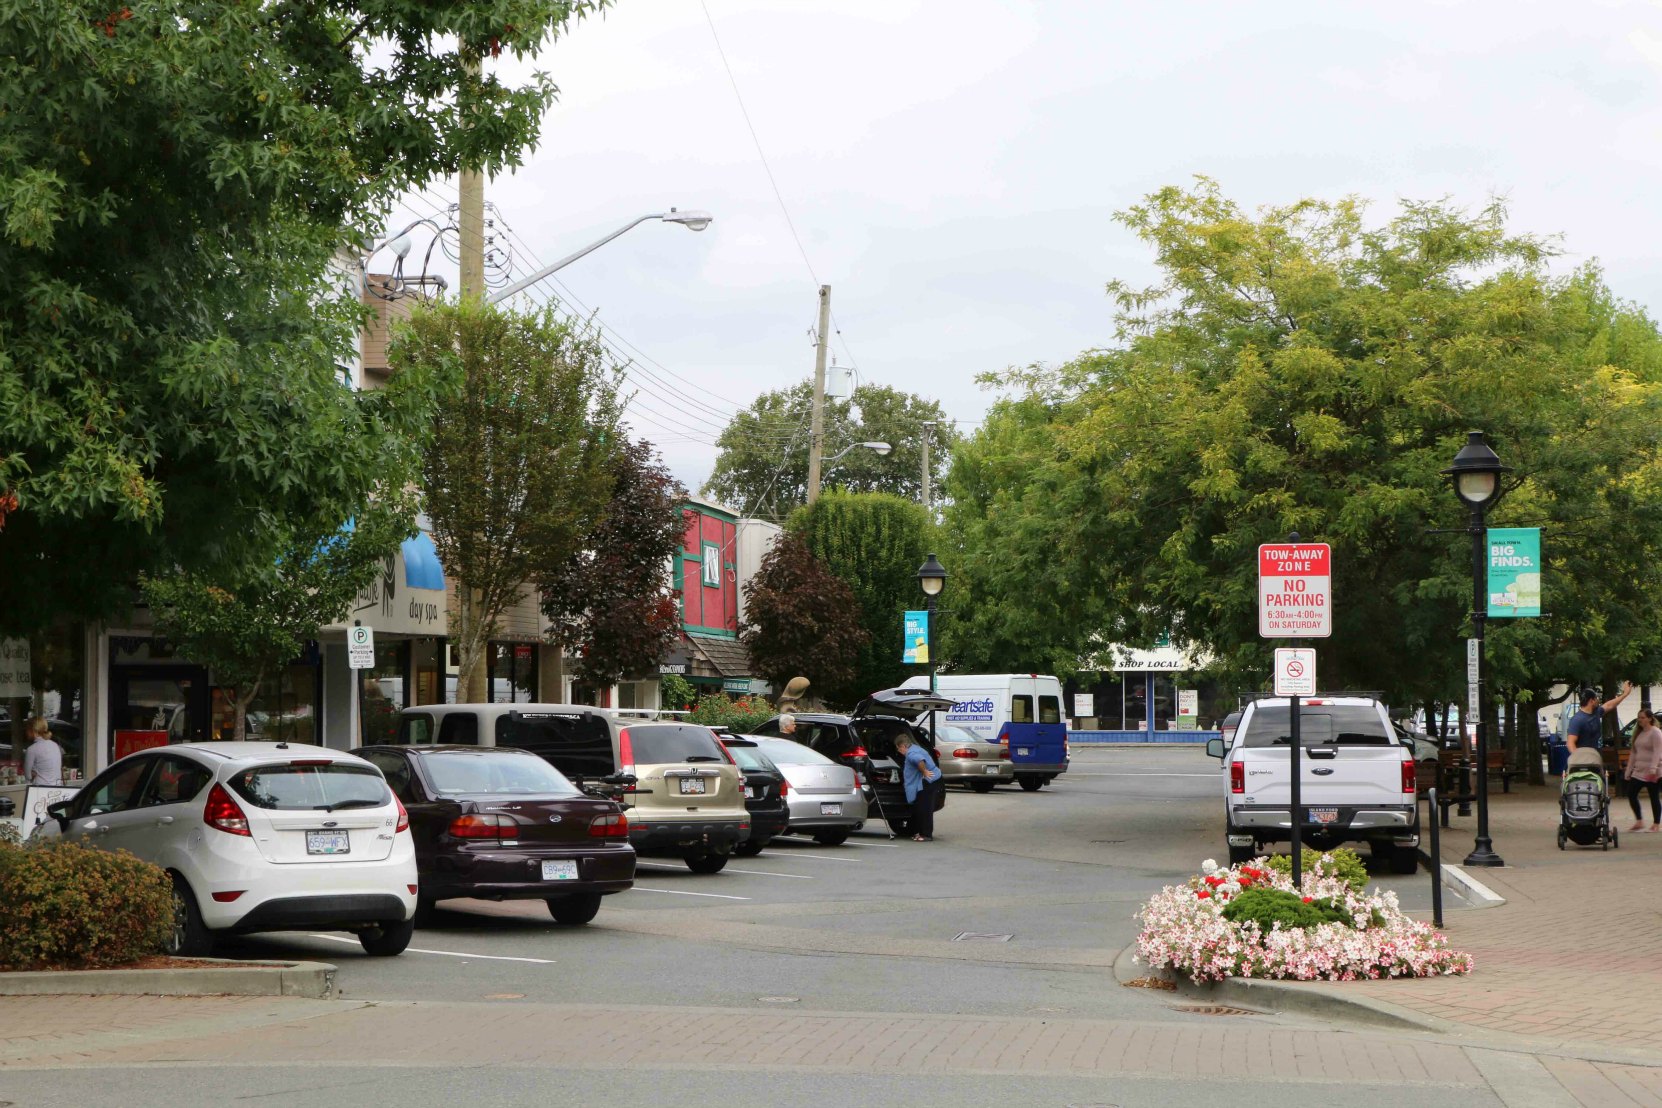 Angle parking in downtown Duncan, B.C. (photo by West Coast Driver Training & Education)